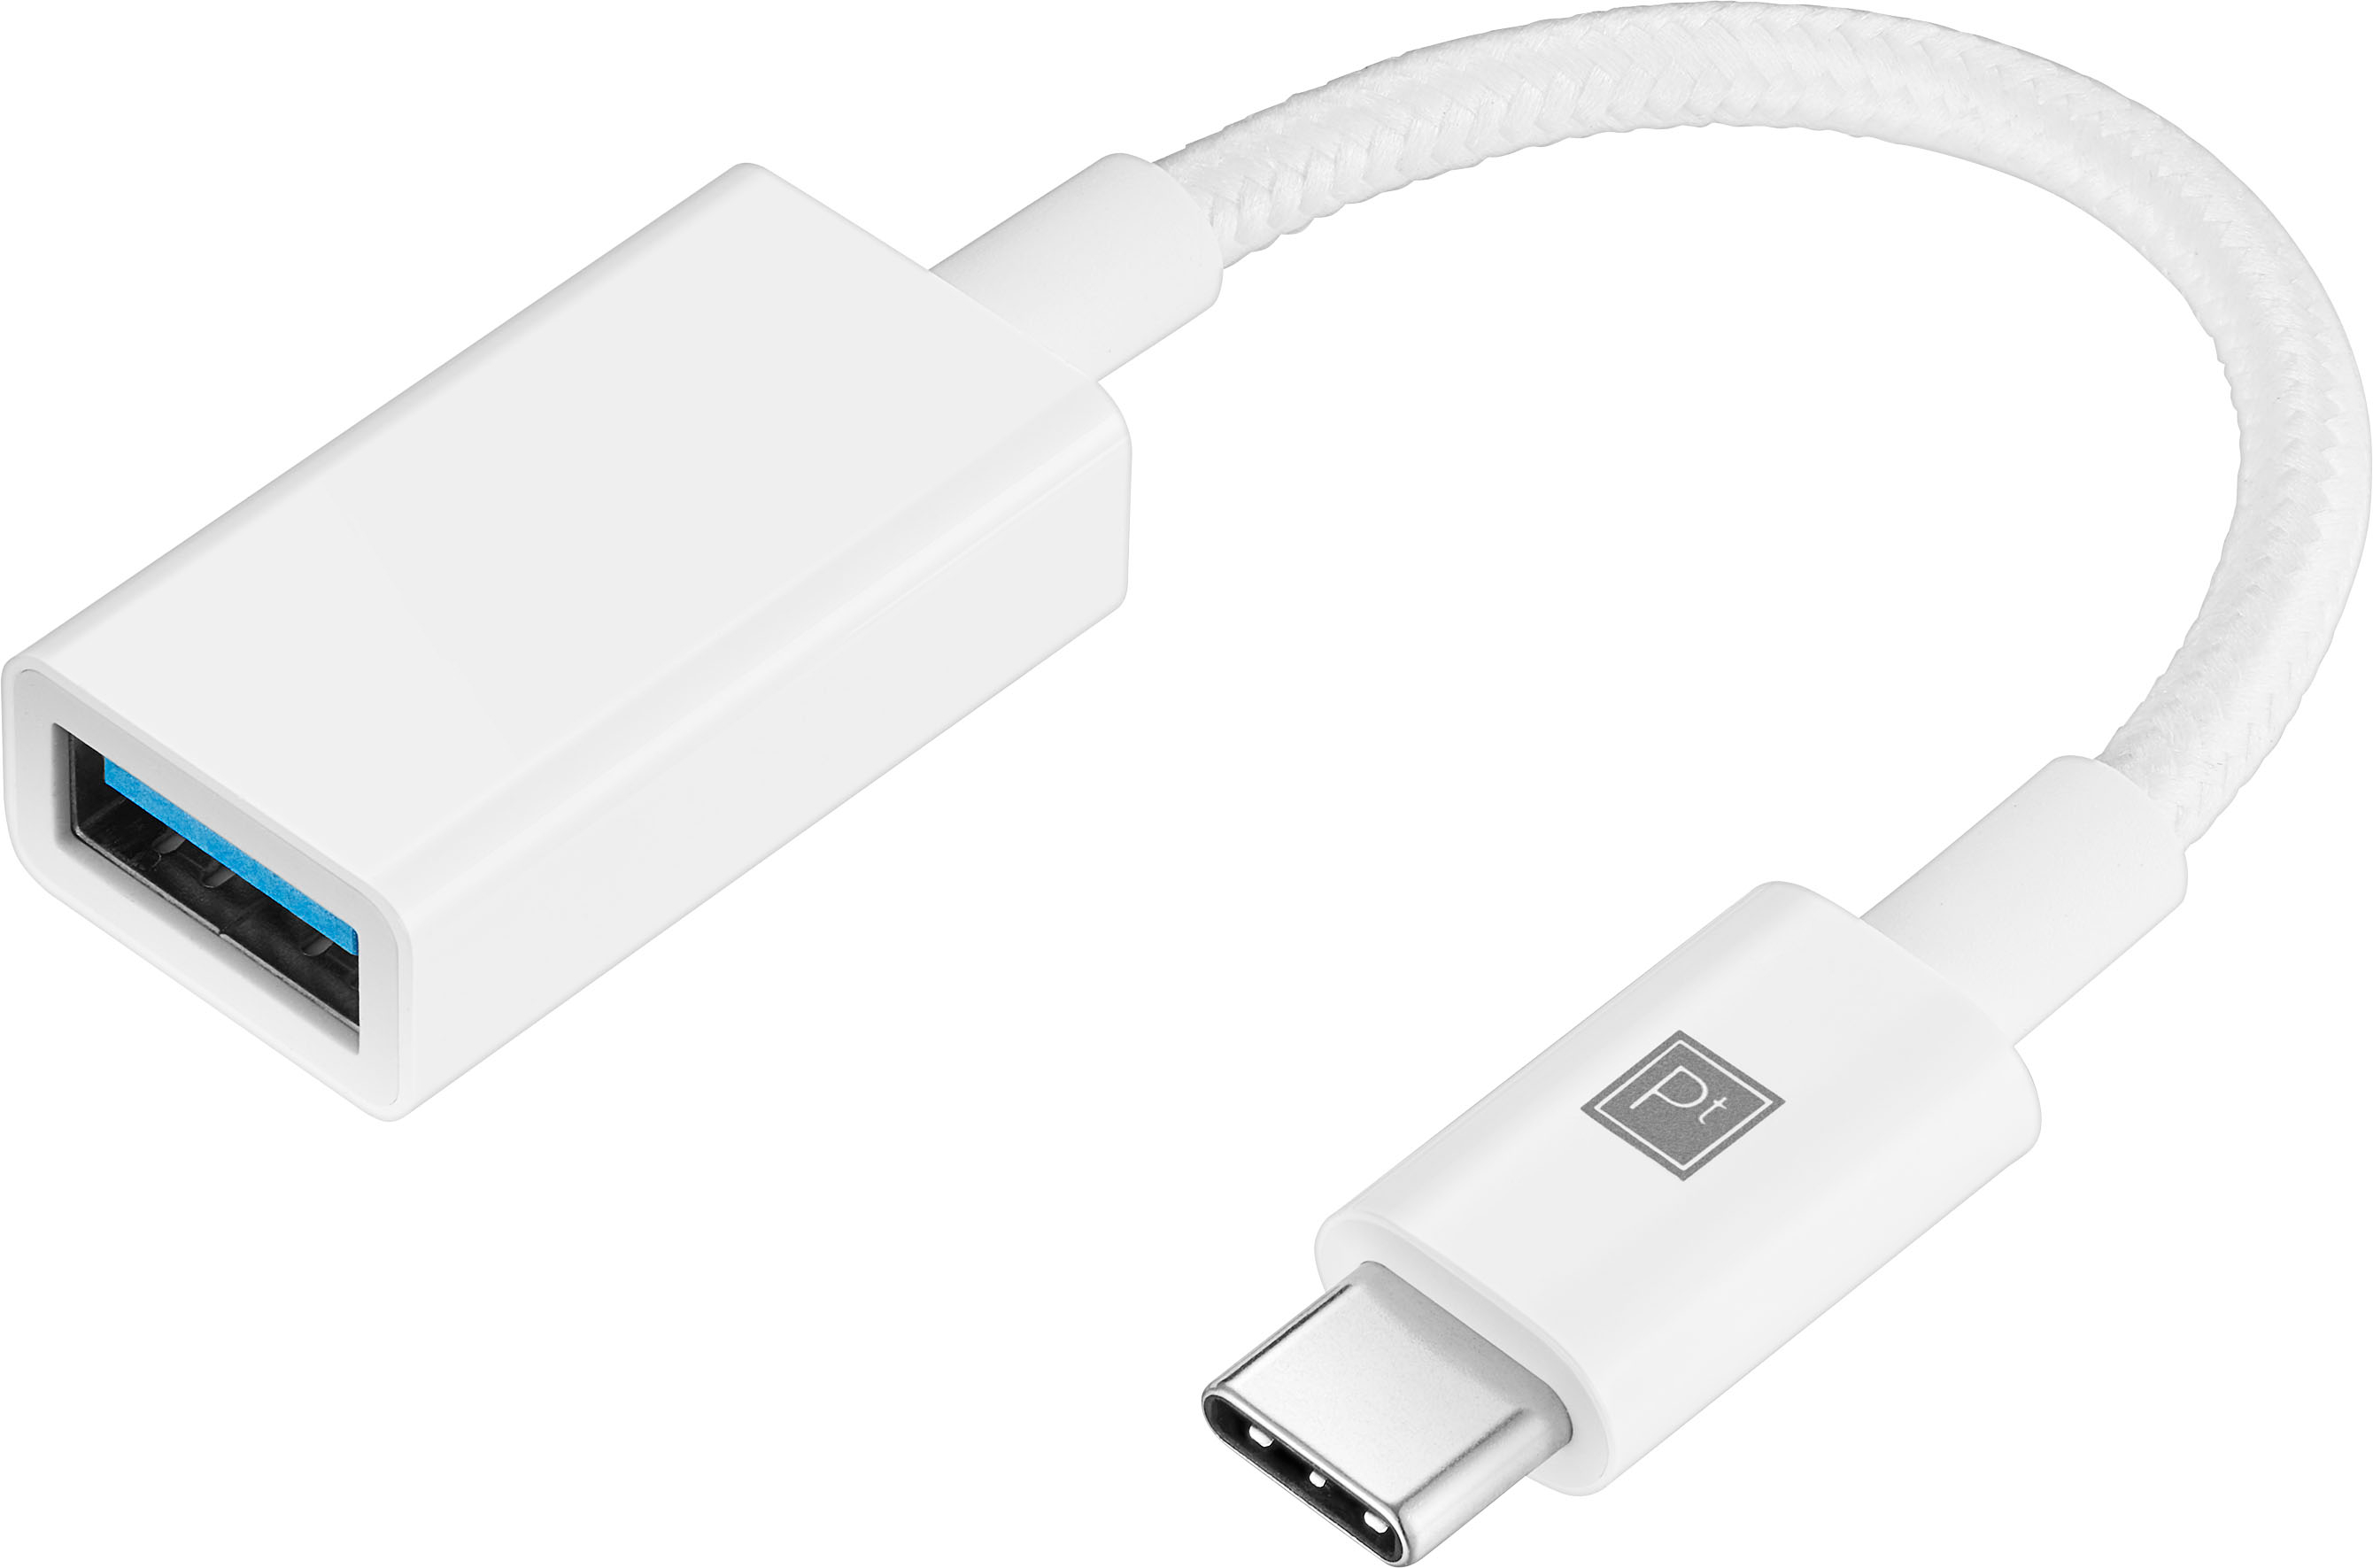 Angle View: Platinum™ - 95W 8’ USB-C 3-Port Wall Charger with 87W USB-C Power Delivery for MacBook, iPad, iPhone, Chromebook or USB-C Laptops - White